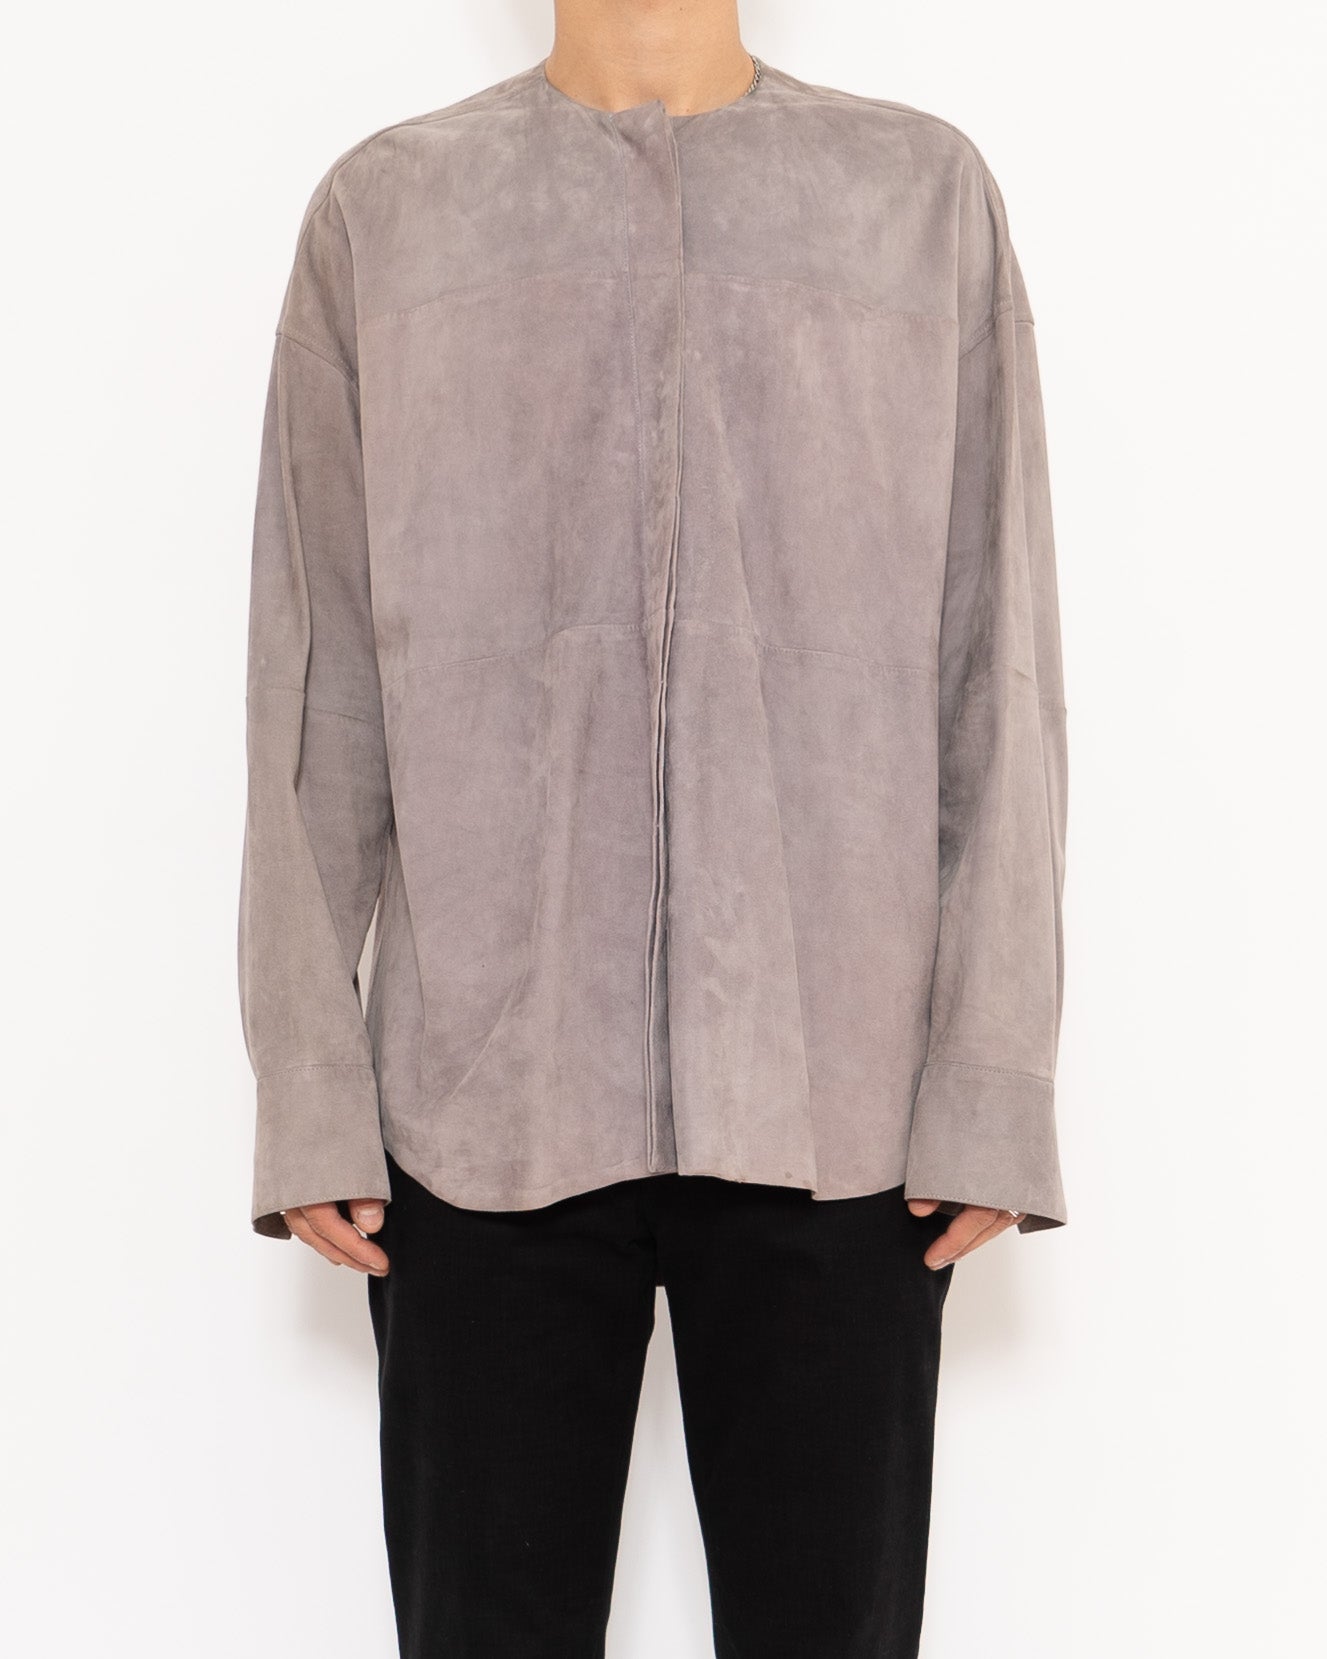 SS15 Lilac Suede Lamb Leather Shirt Sample